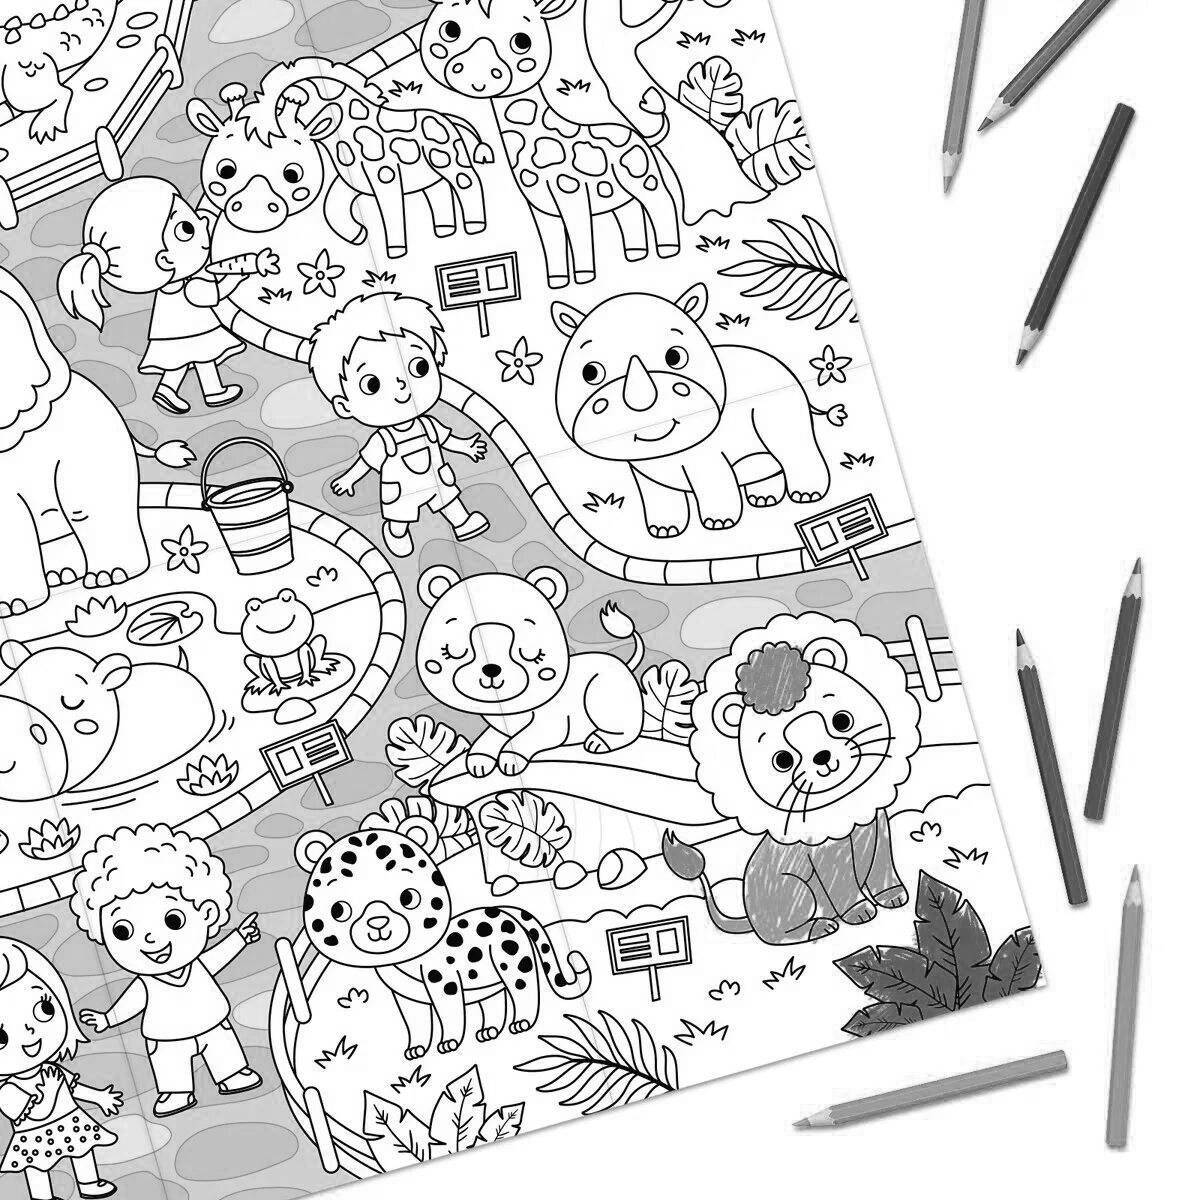 Spectacular giant coloring book for kids